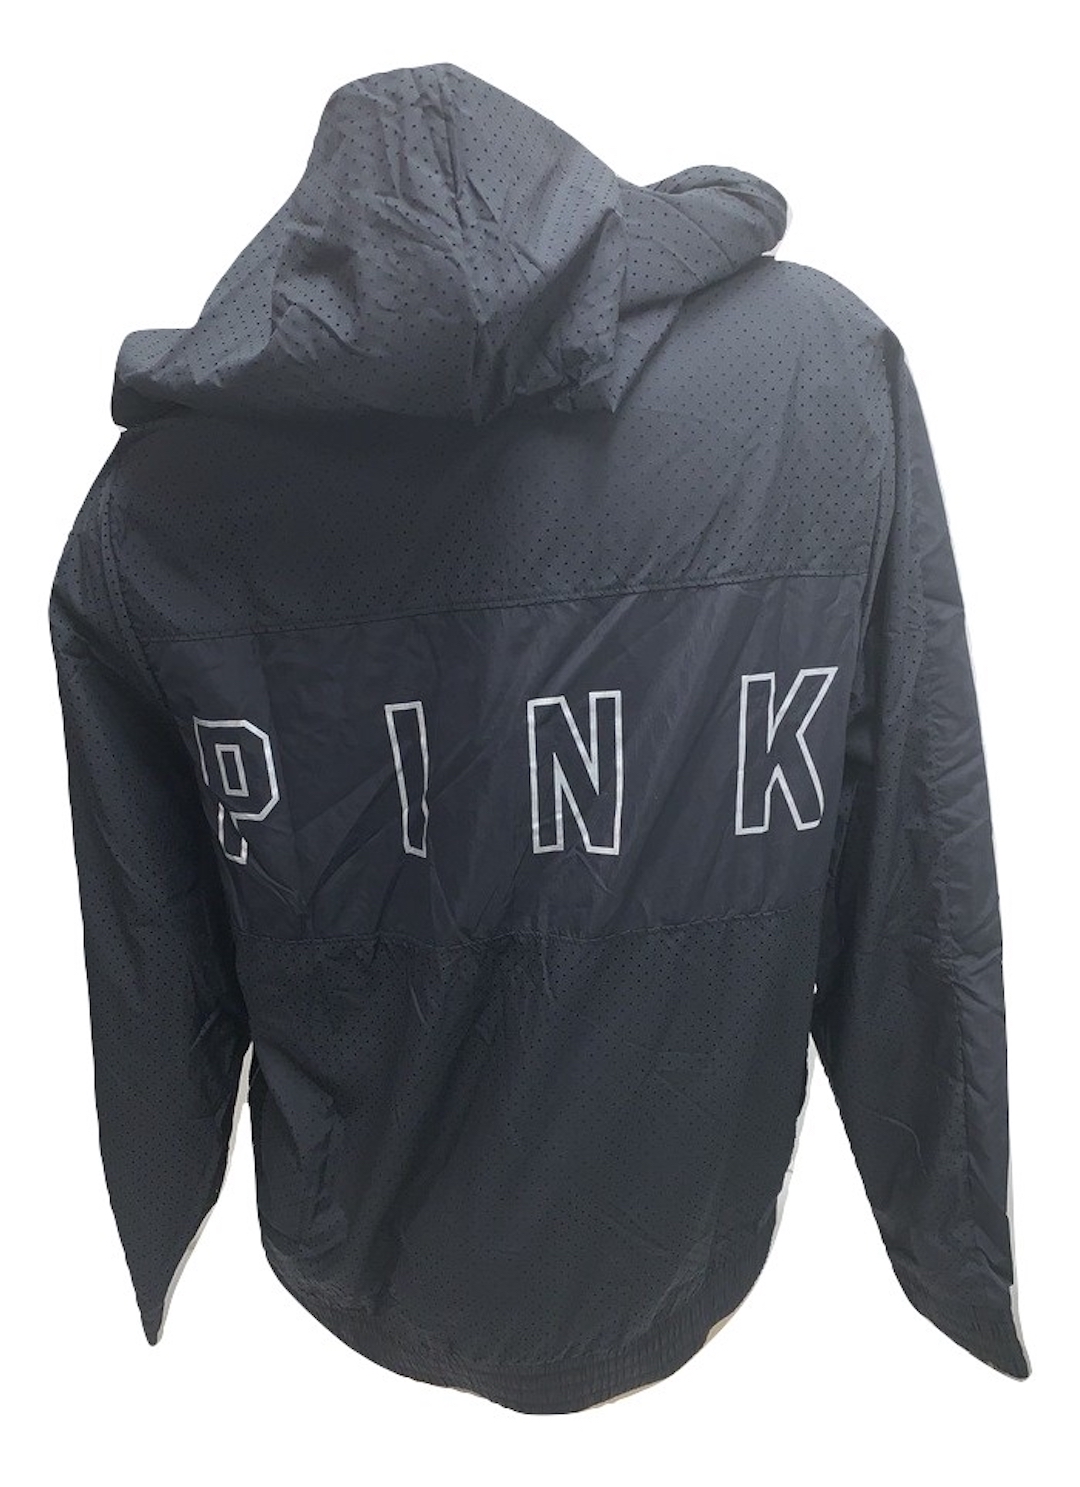 Victoria's Secret  Pink Anorak Windbreaker Jacket Full Zip Color Black Size XSmall/Small NWT - image 3 of 3